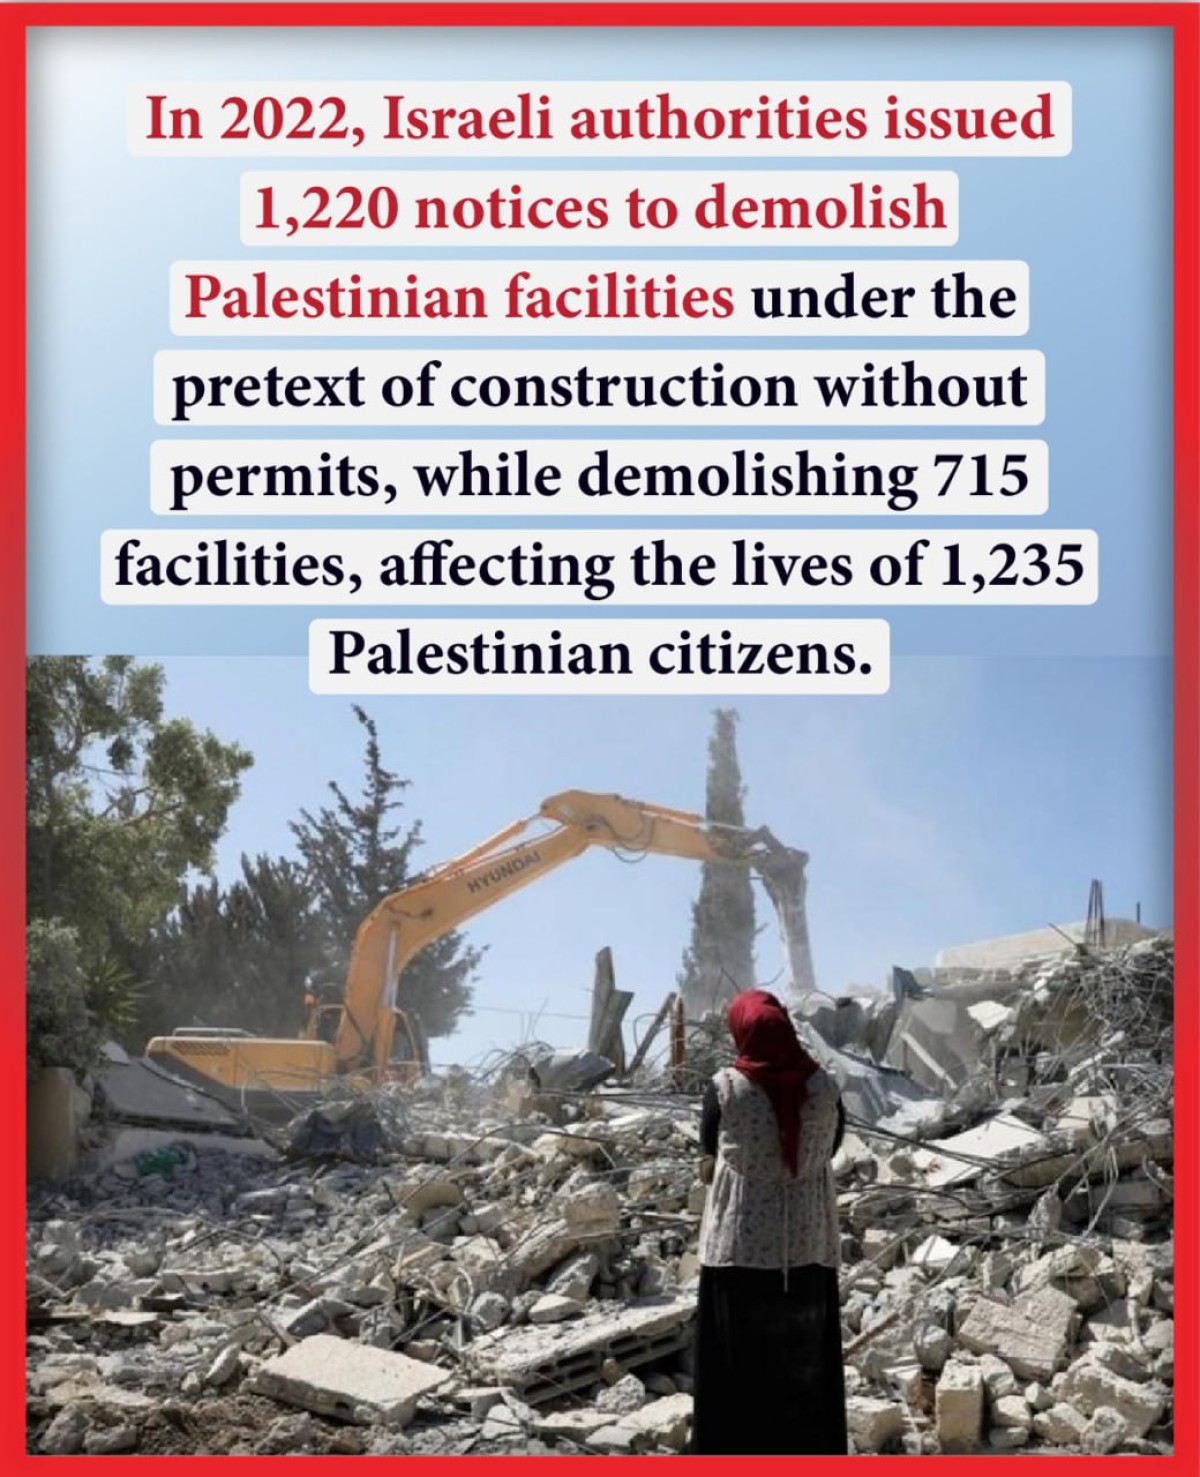 In 2022, Israeli authorities issued 1,220 notices to demolish Palestinian facilities